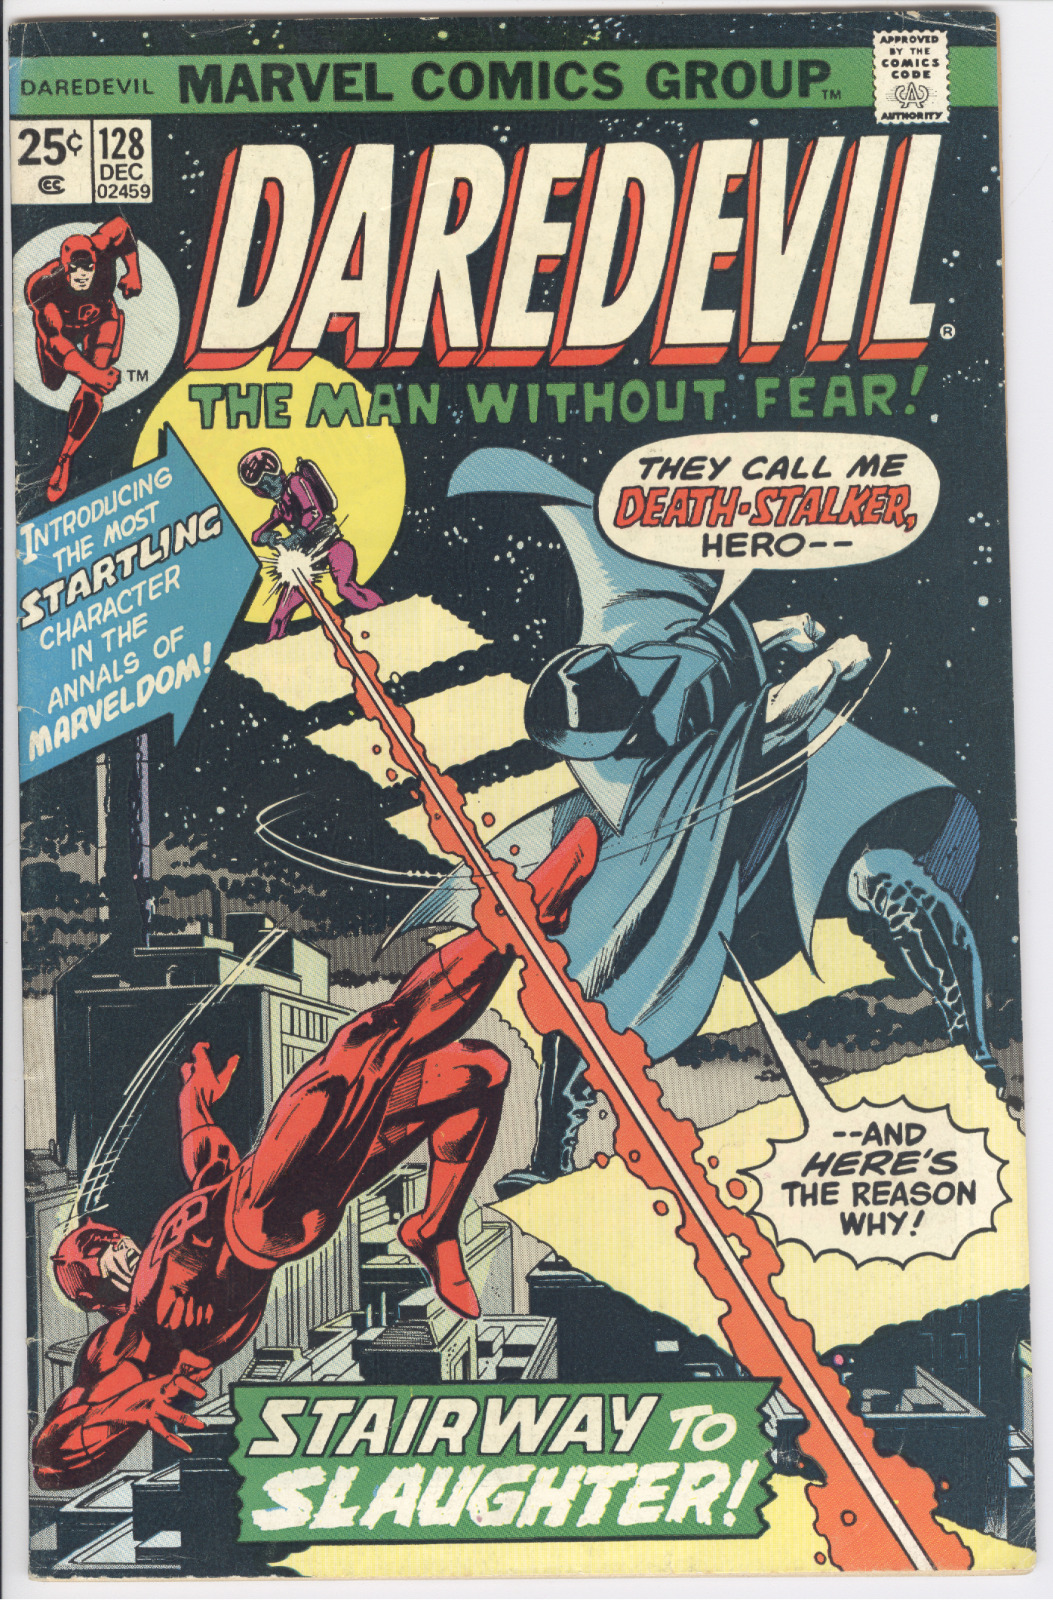 DAREDEVIL #128 MARVEL COMICS featuring stairway to slaughter G/VG or better